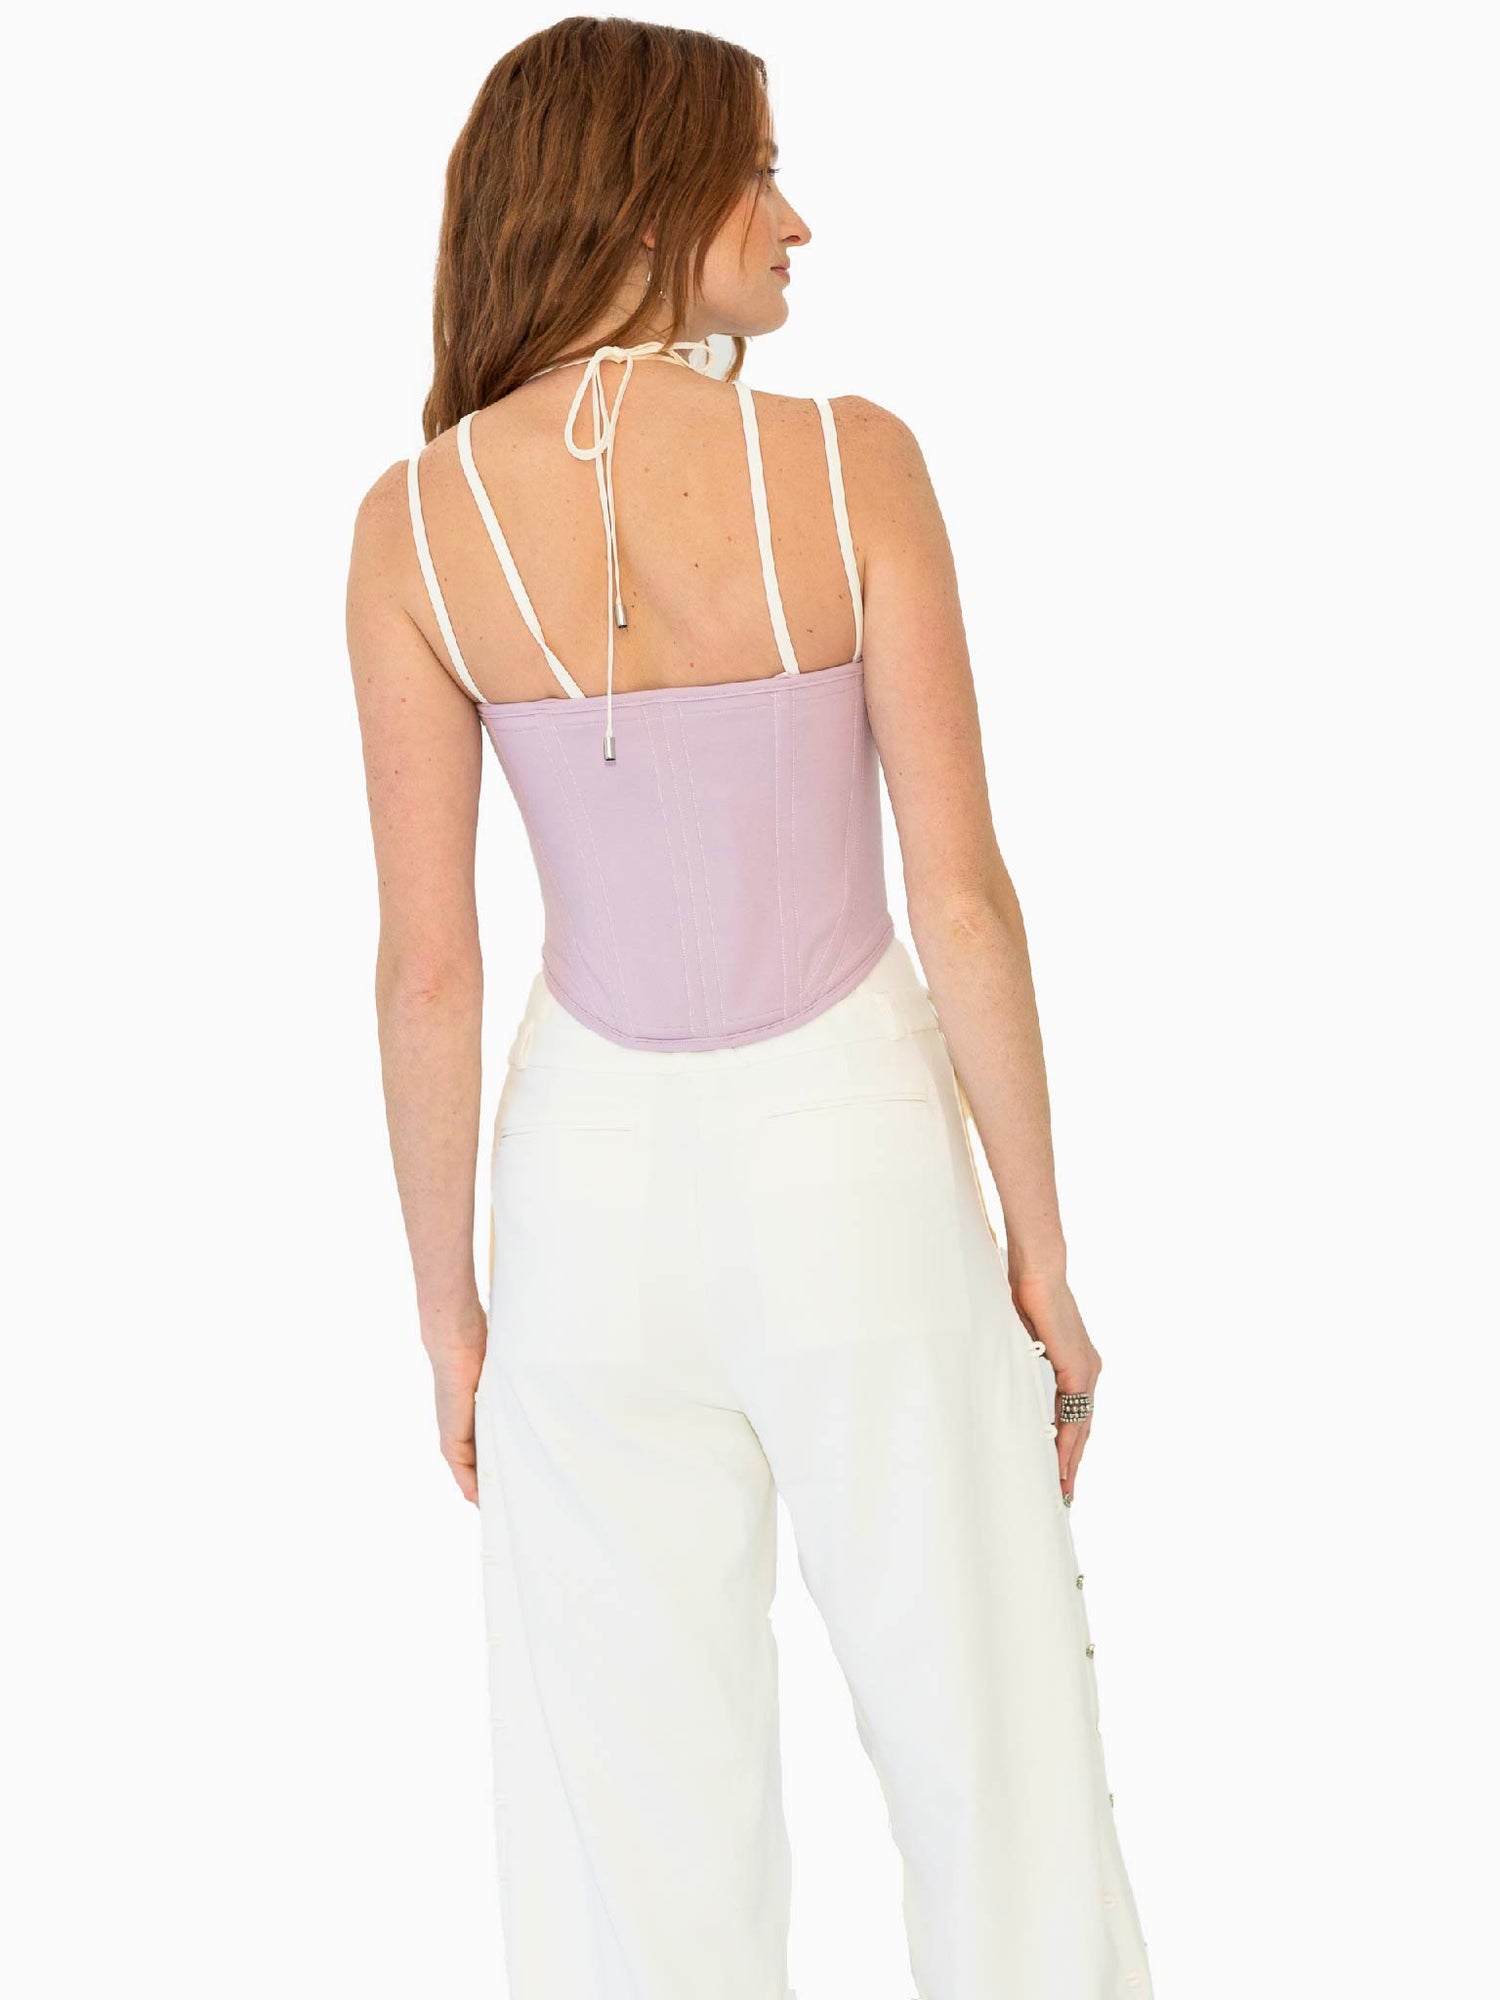 HAN WEN Stretchy X-Bralette Layered Corset Top in Lavender